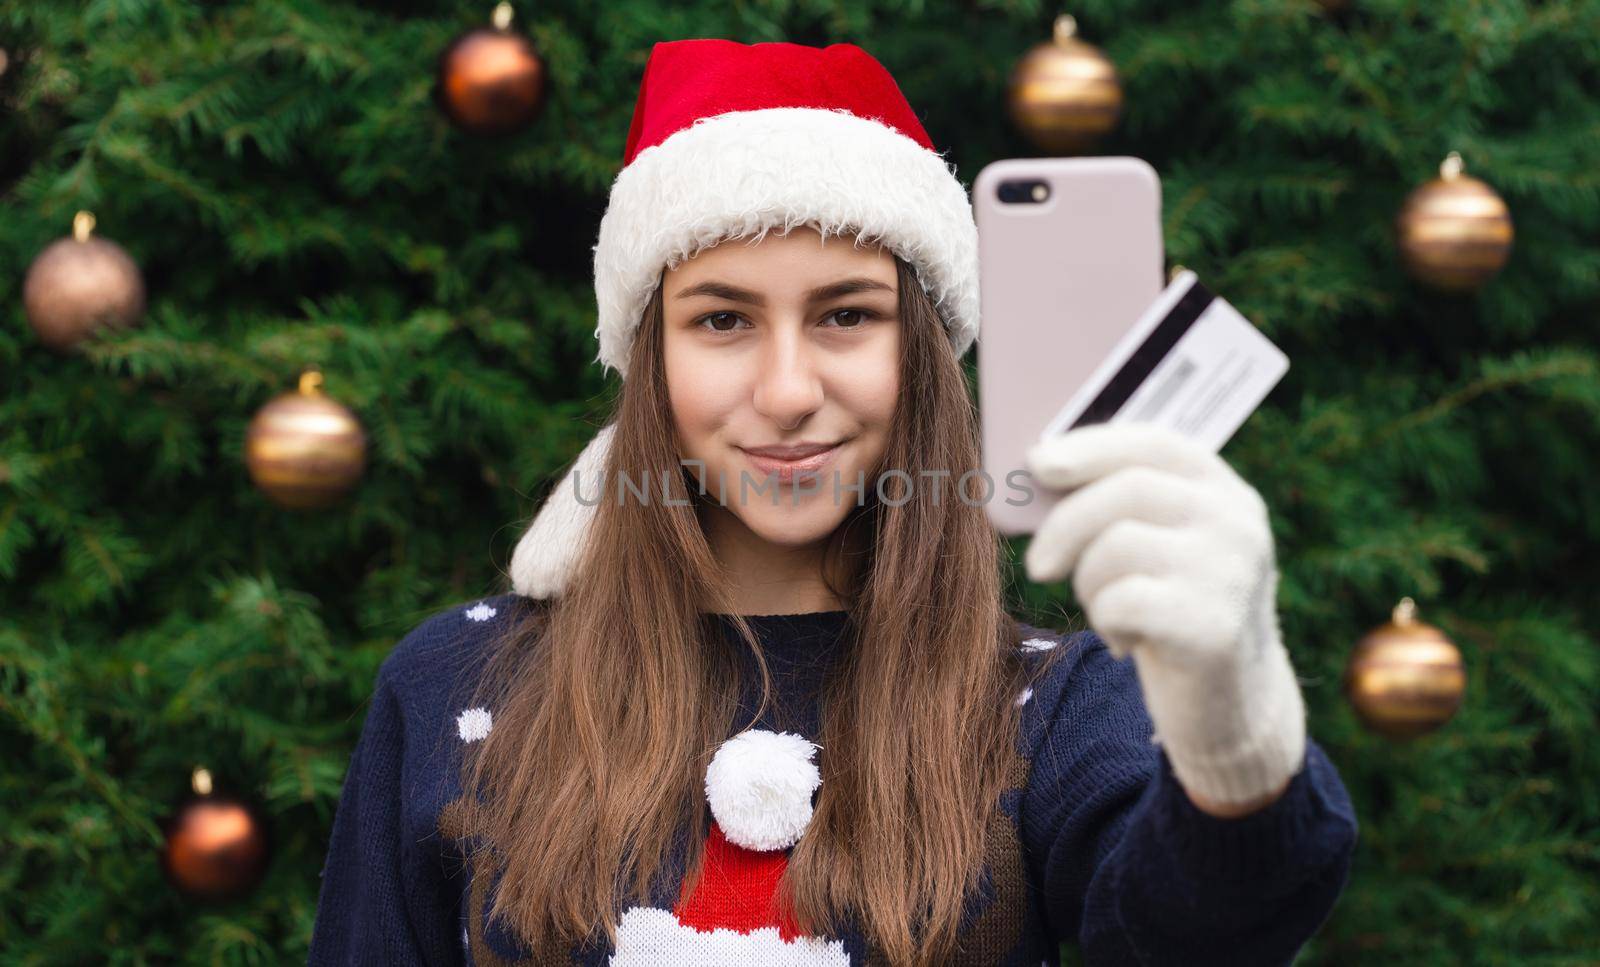 Christmas online shopping. A young girl in a santa claus hat and a blue sweater holding smartphone. Christmas during the coronavirus